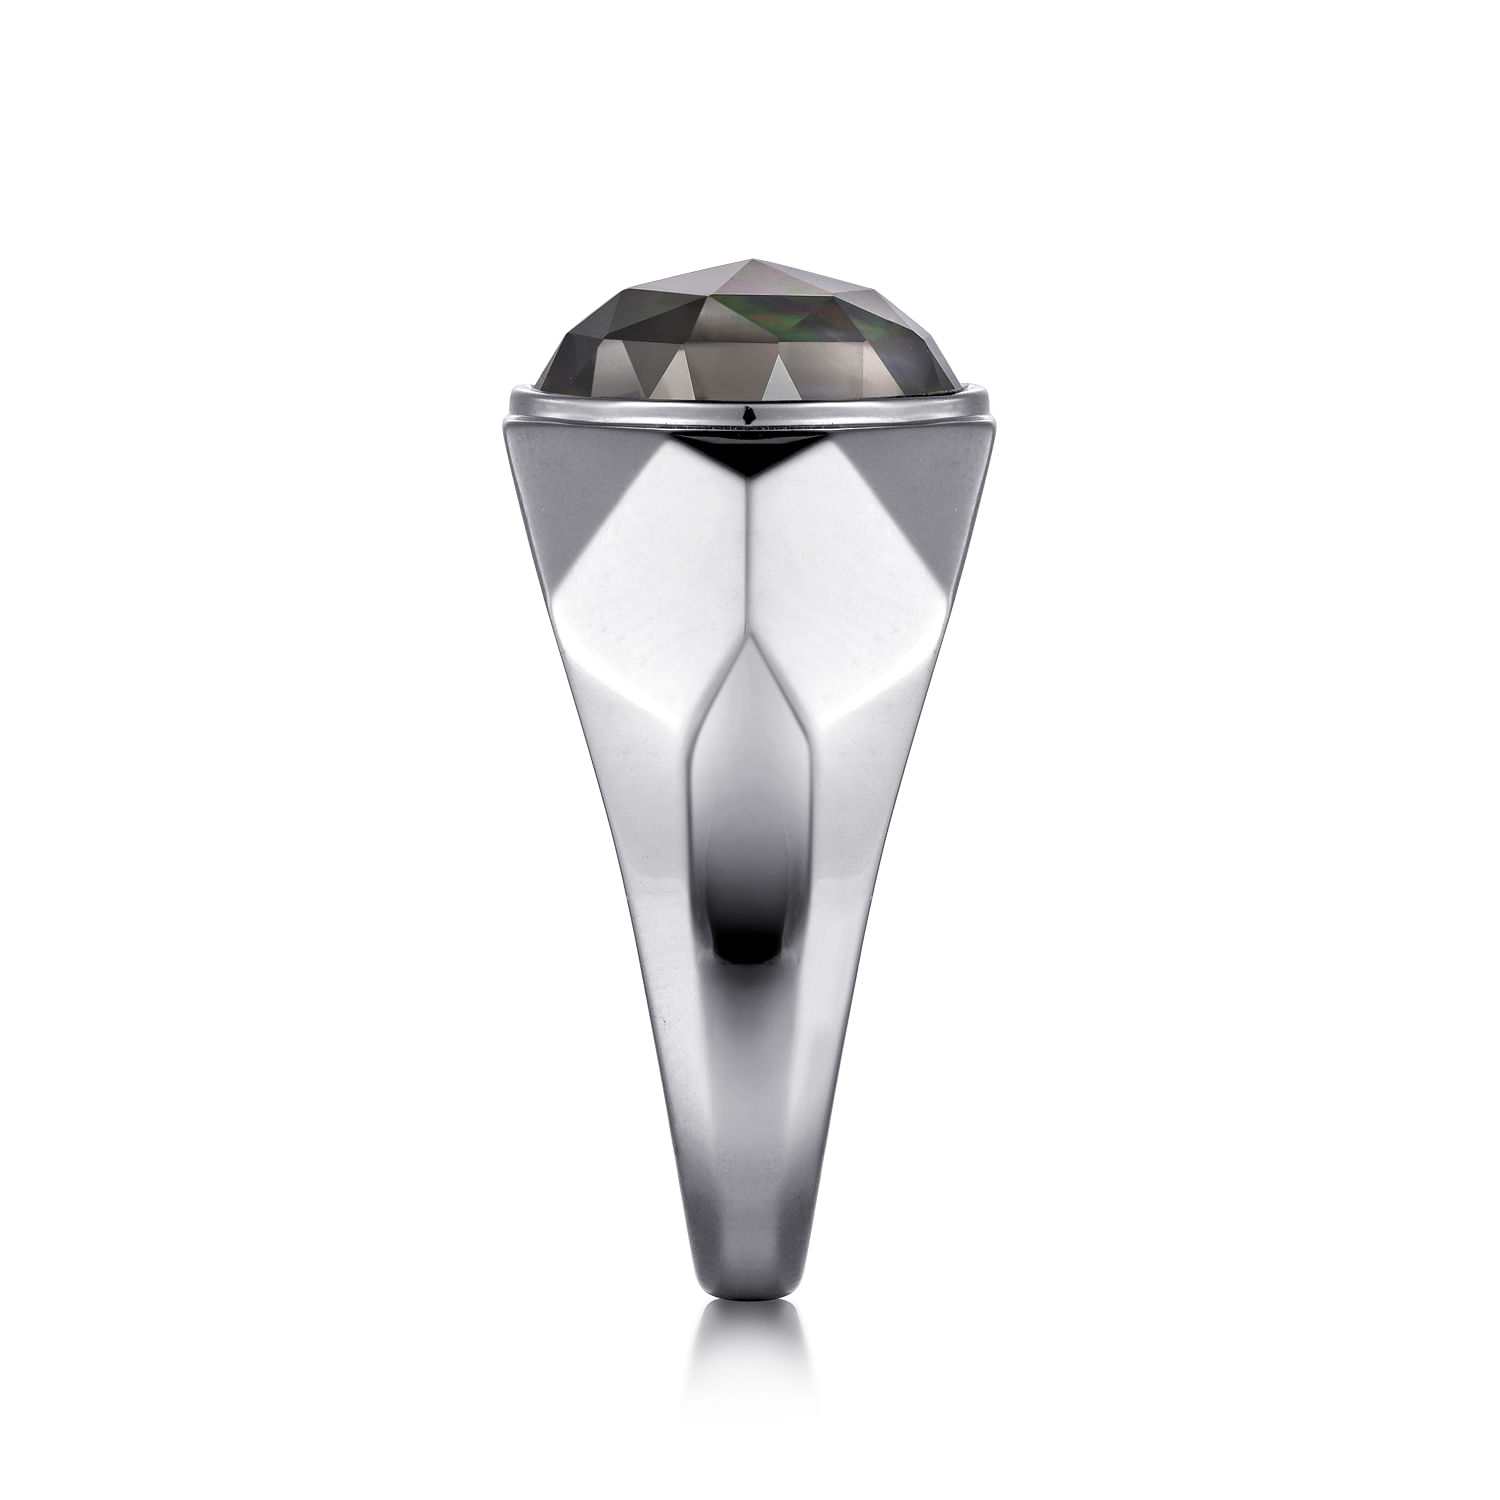 Wide 925 Sterling Silver Signet Ring with Black Mother of Pearl Stone in High Polished Finish - Shot 4